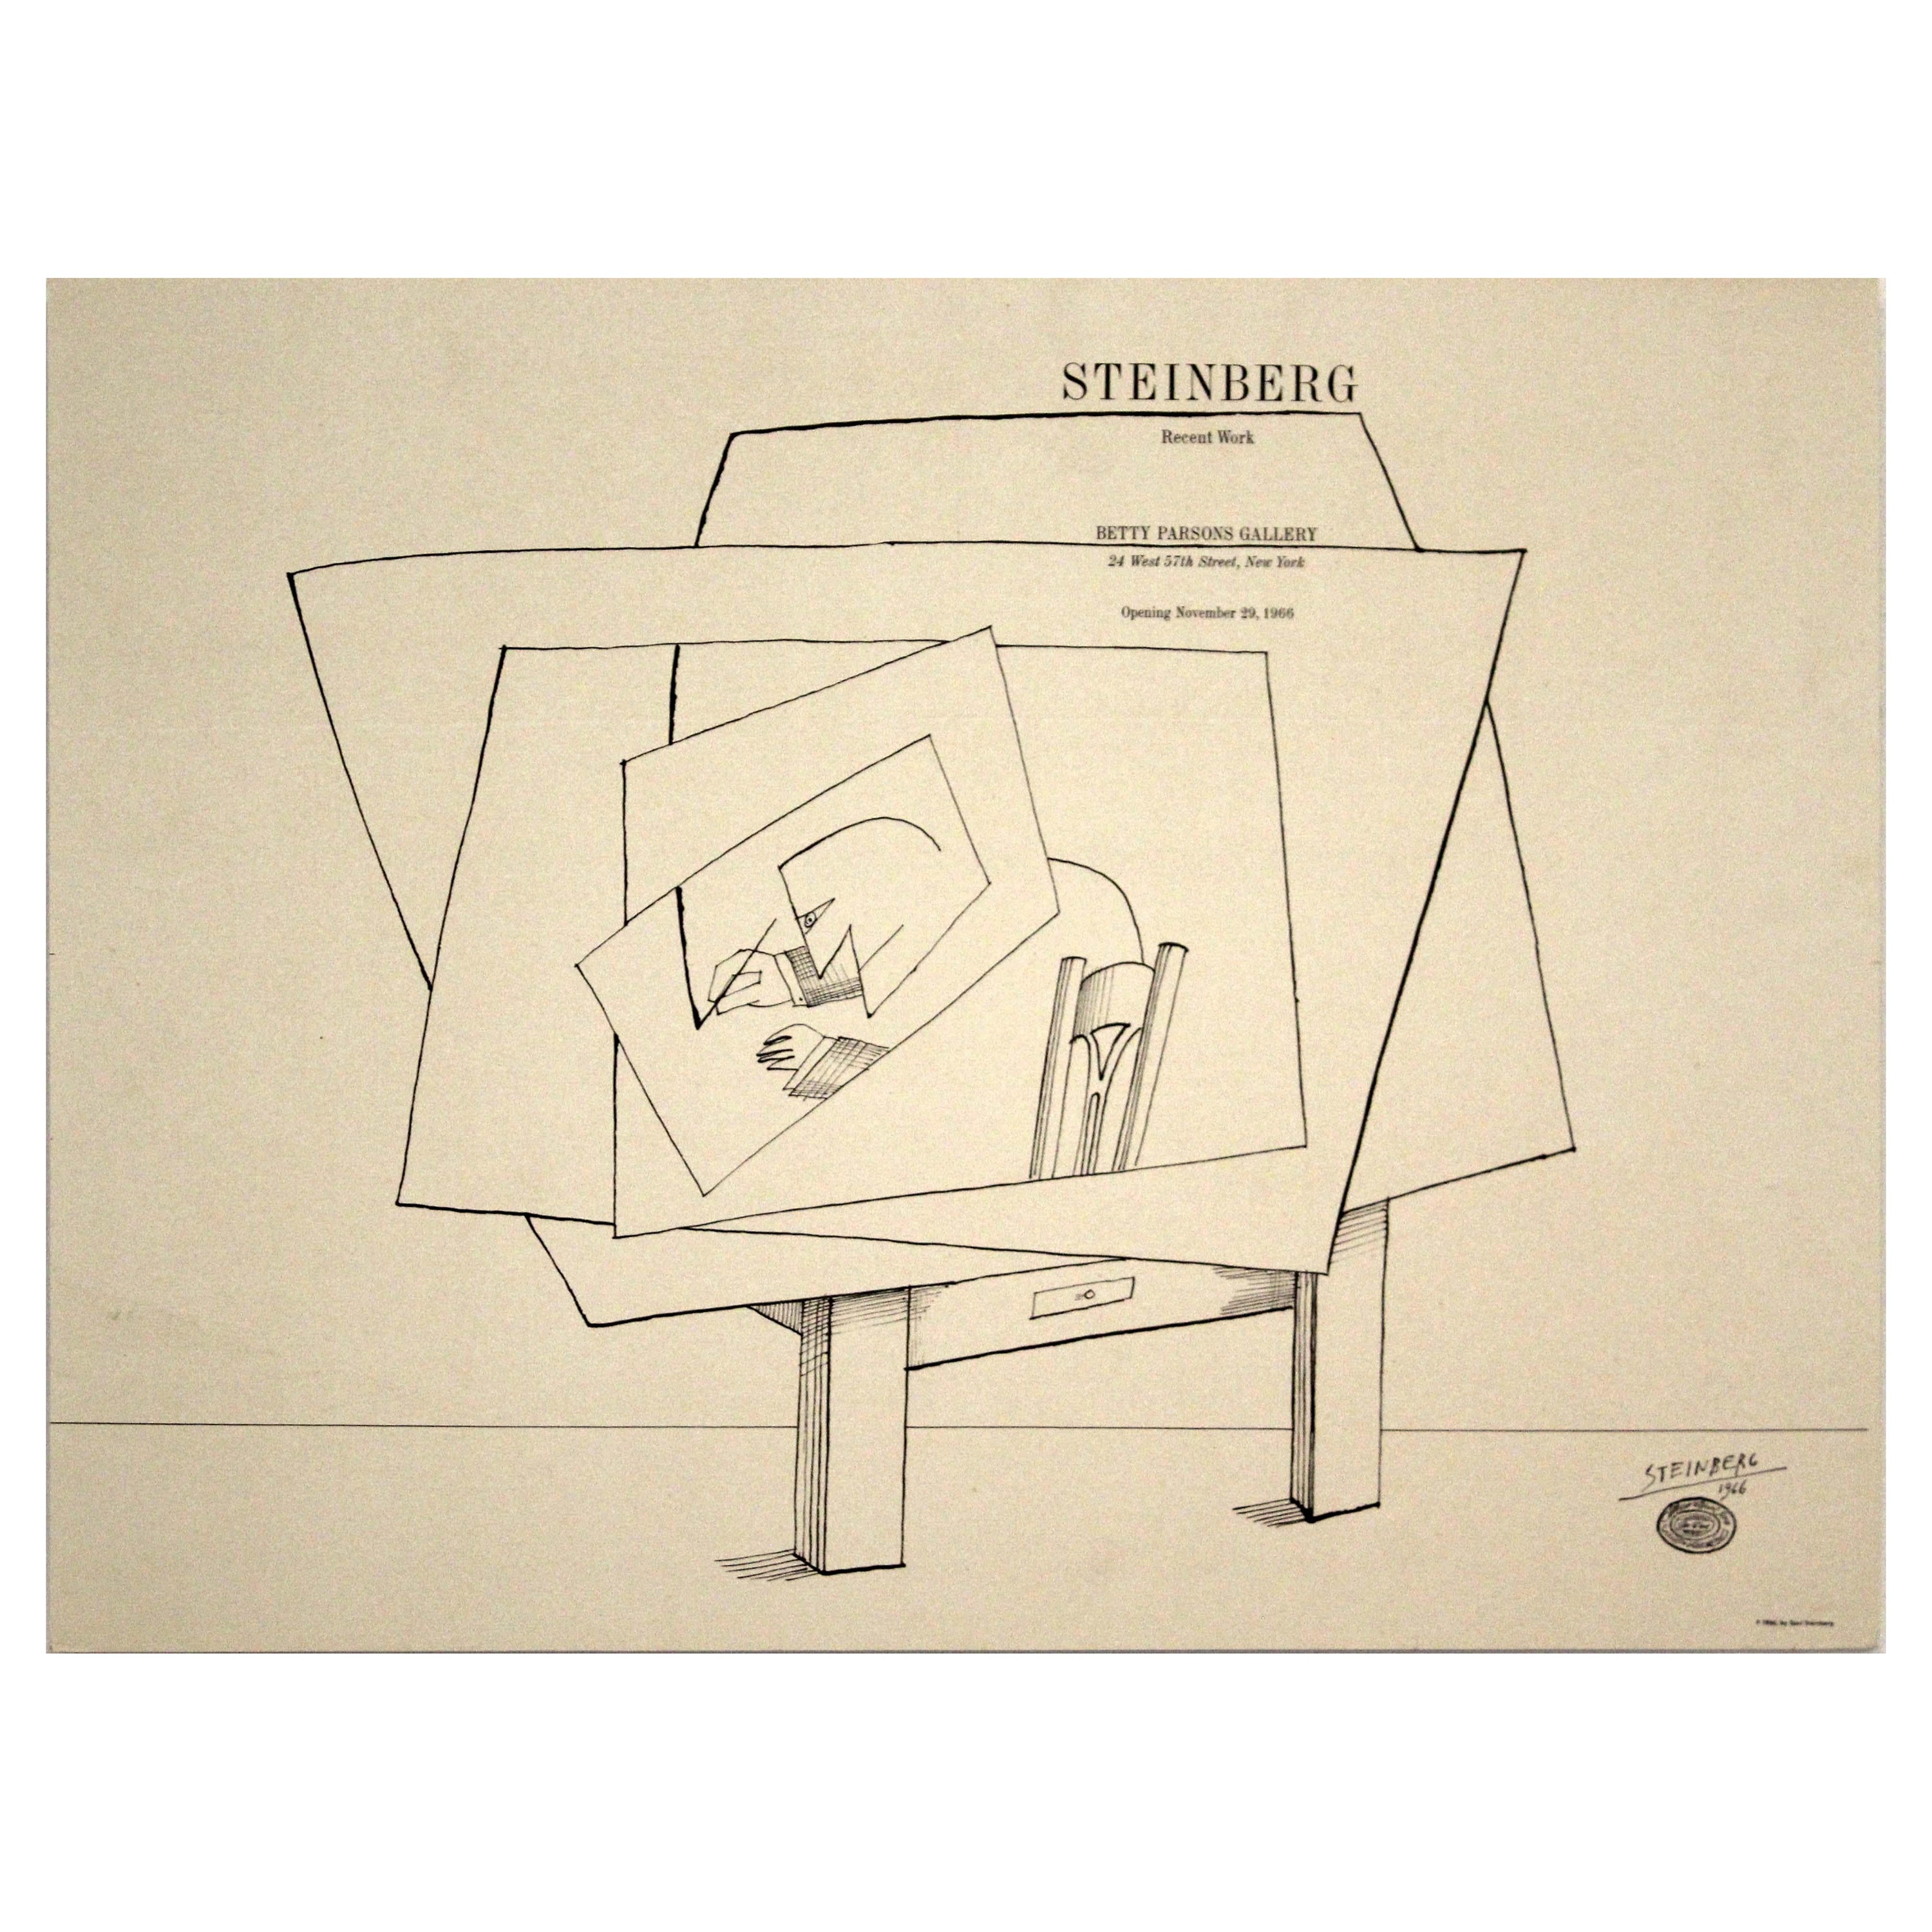 Saul Steinberg Vintage Exhibition Poster Recent Work at Betty Parsons Gallery